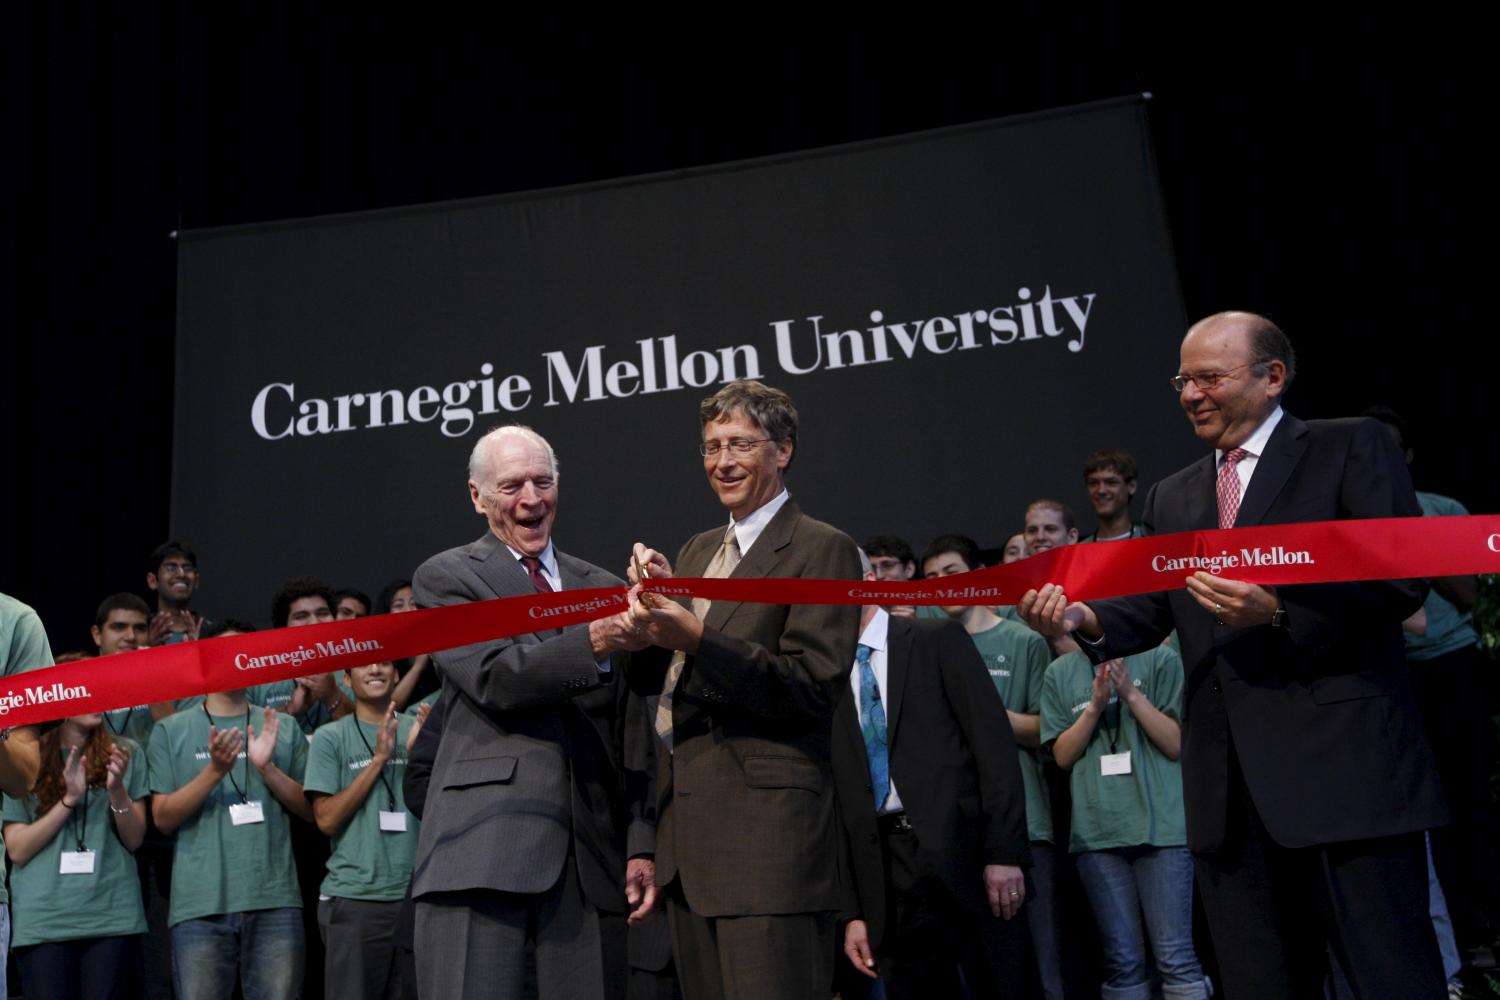 REUTERS/Chris Wattie - Microsoft founder Bill Gates (R) cuts a ribbon with chairman of Hillman Foundation Henry Hillman during a dedication ceremony for the Gates Center for Computer Science and the Hillman Center for Future-Generation Technologies at Carnegie Mellon University in Pittsburgh, Pennsylvania September 22, 2009.